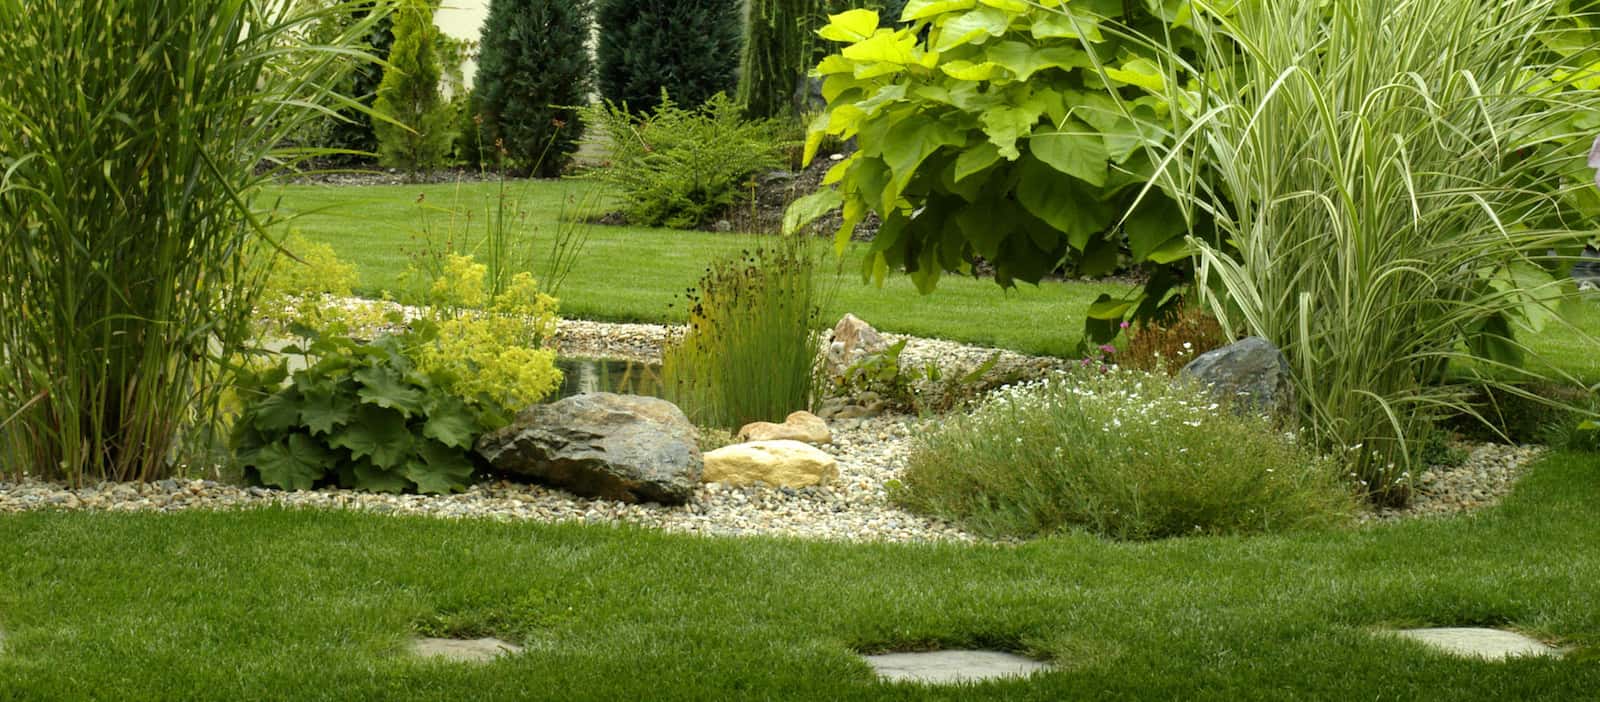 Domestic Landscaping Image